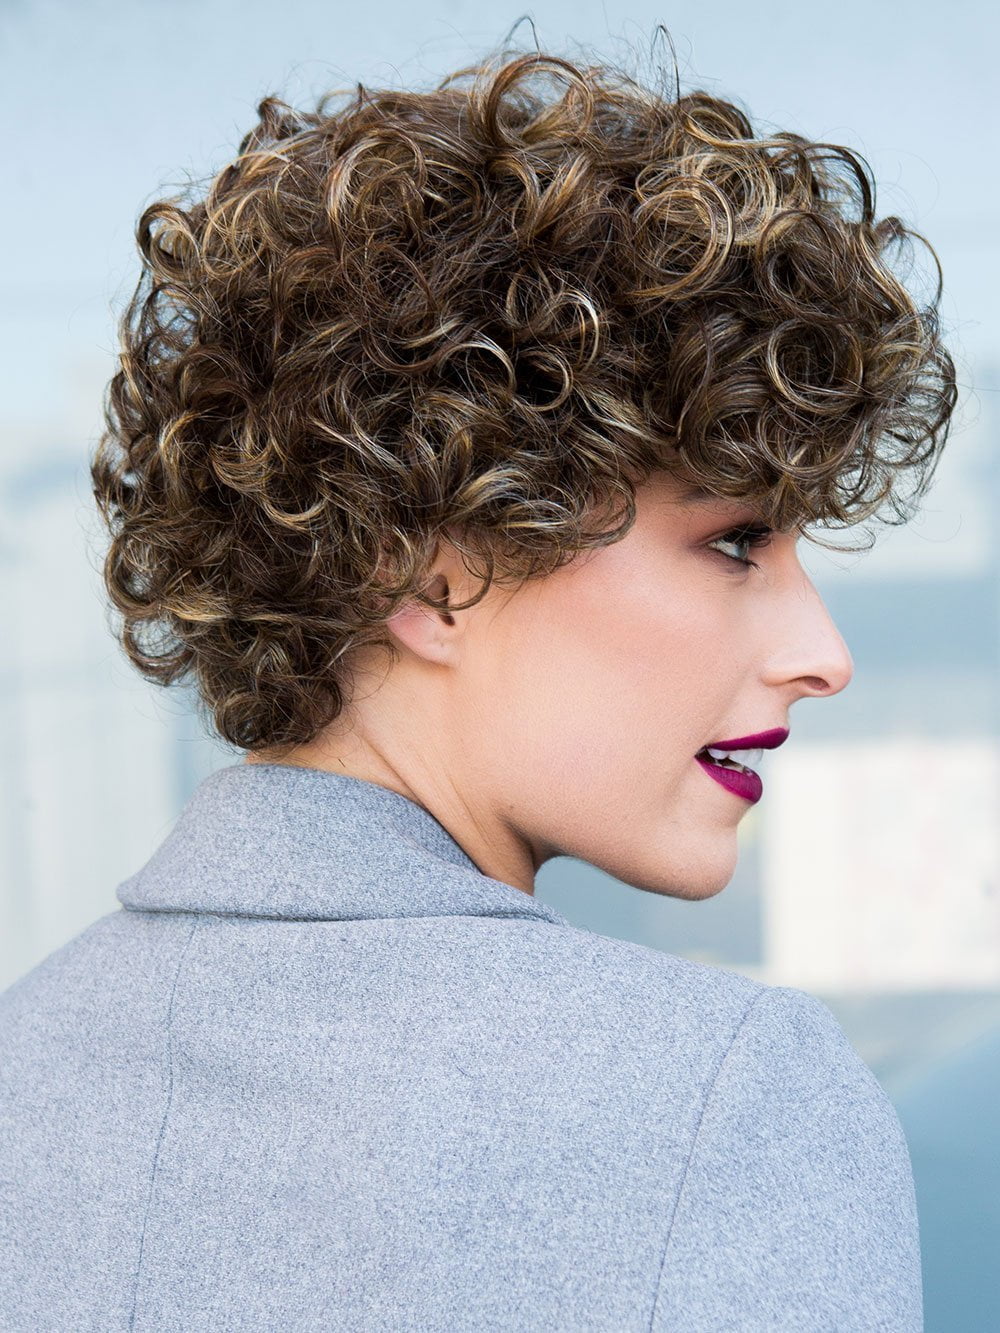 This fun, short style is truly ready to rock straight out of the box